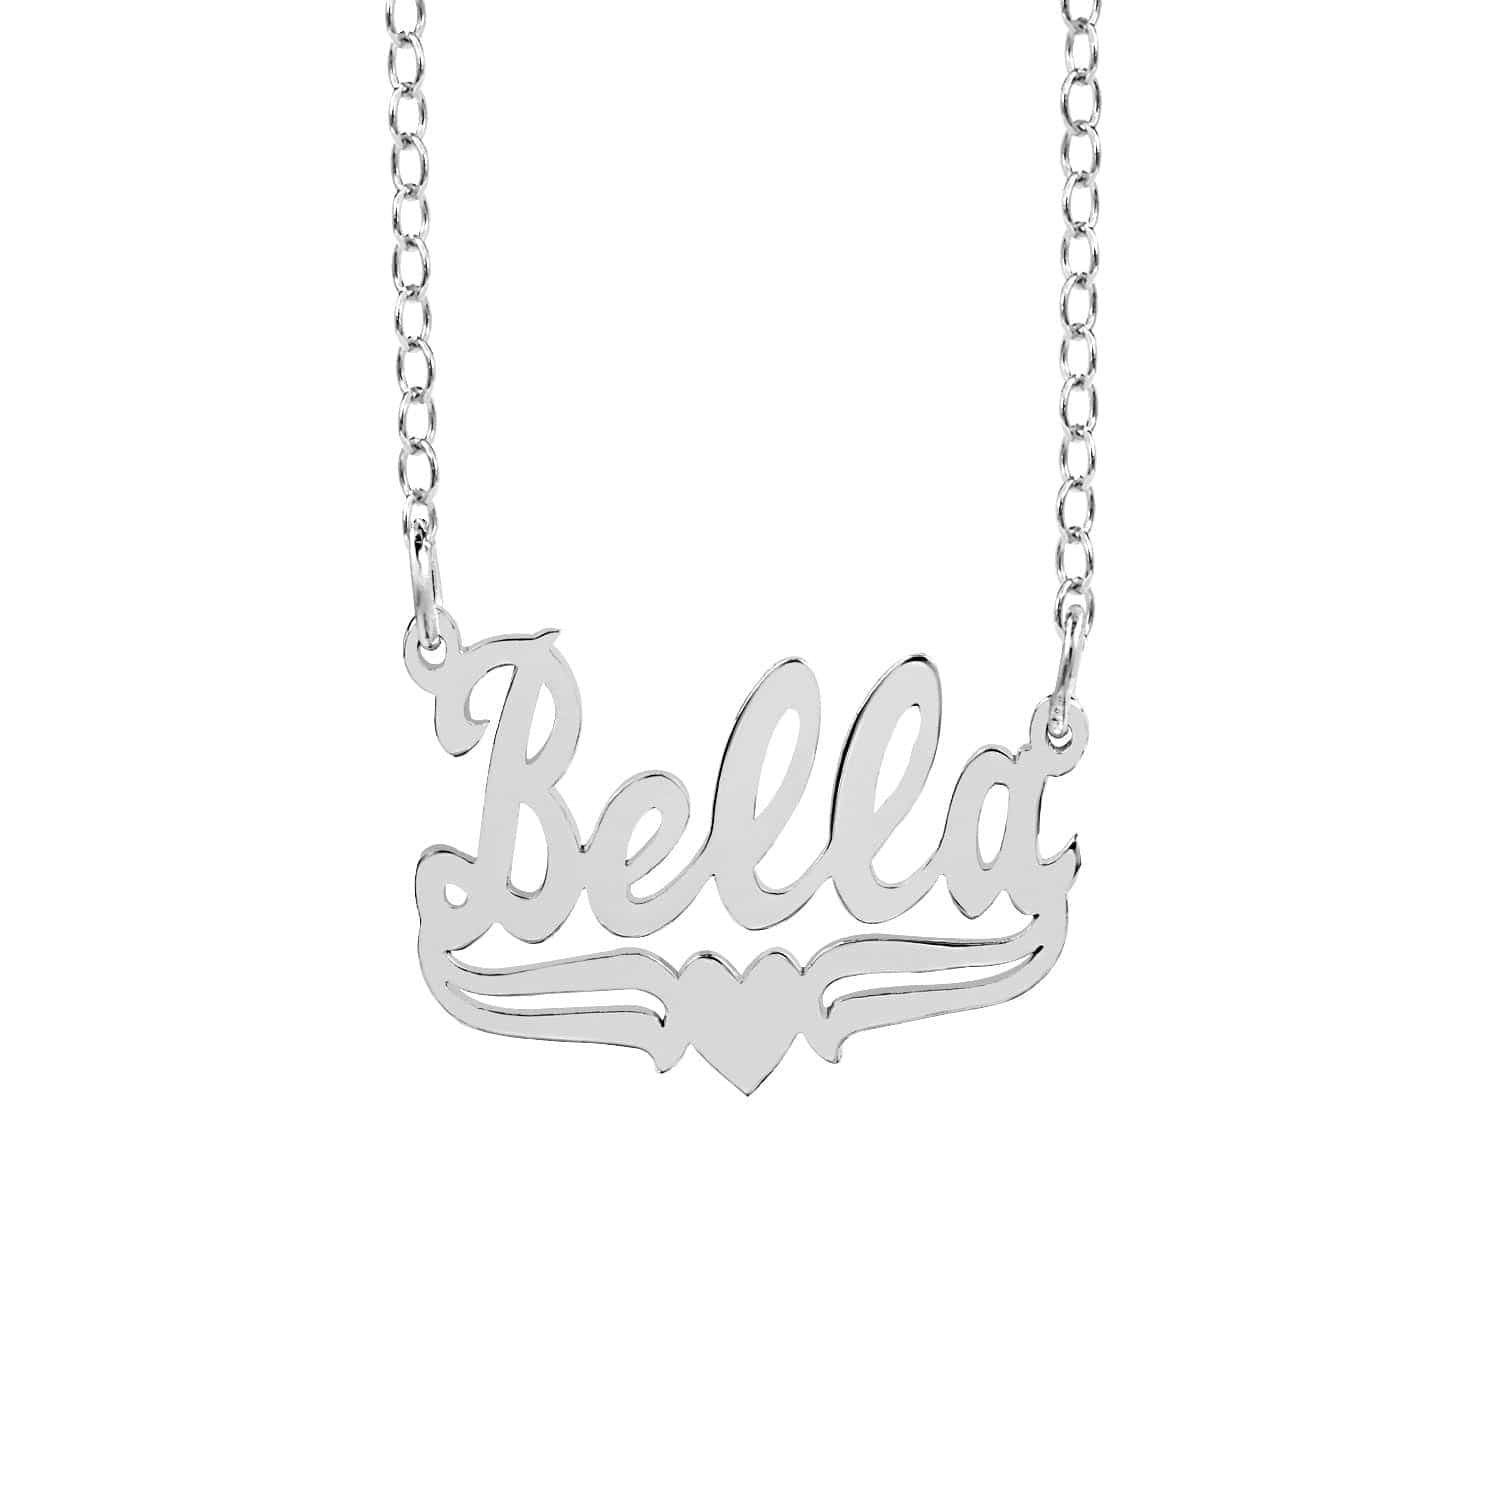 The Bella Name Necklace with Heart